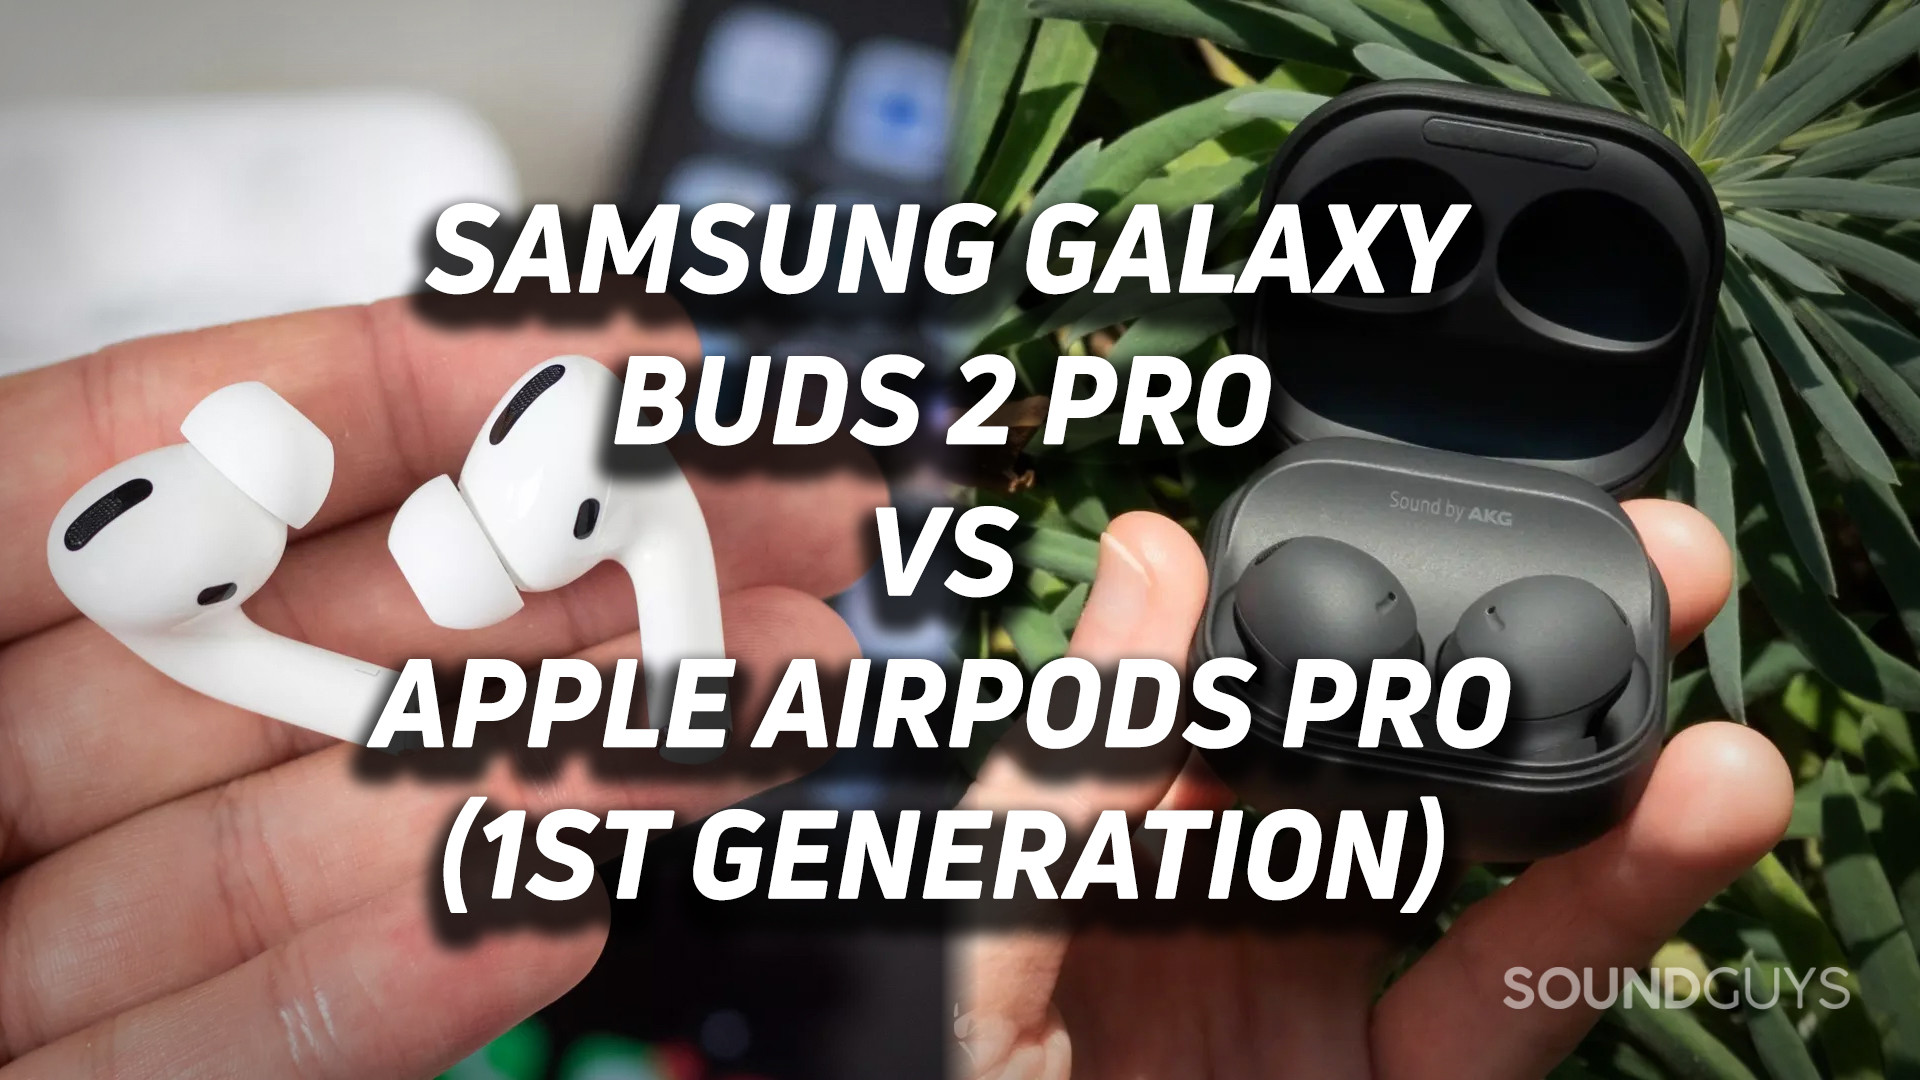 The hero image for the Samsung Galaxy Buds 2 Pro vs Apple AirPods Pro comparison article.